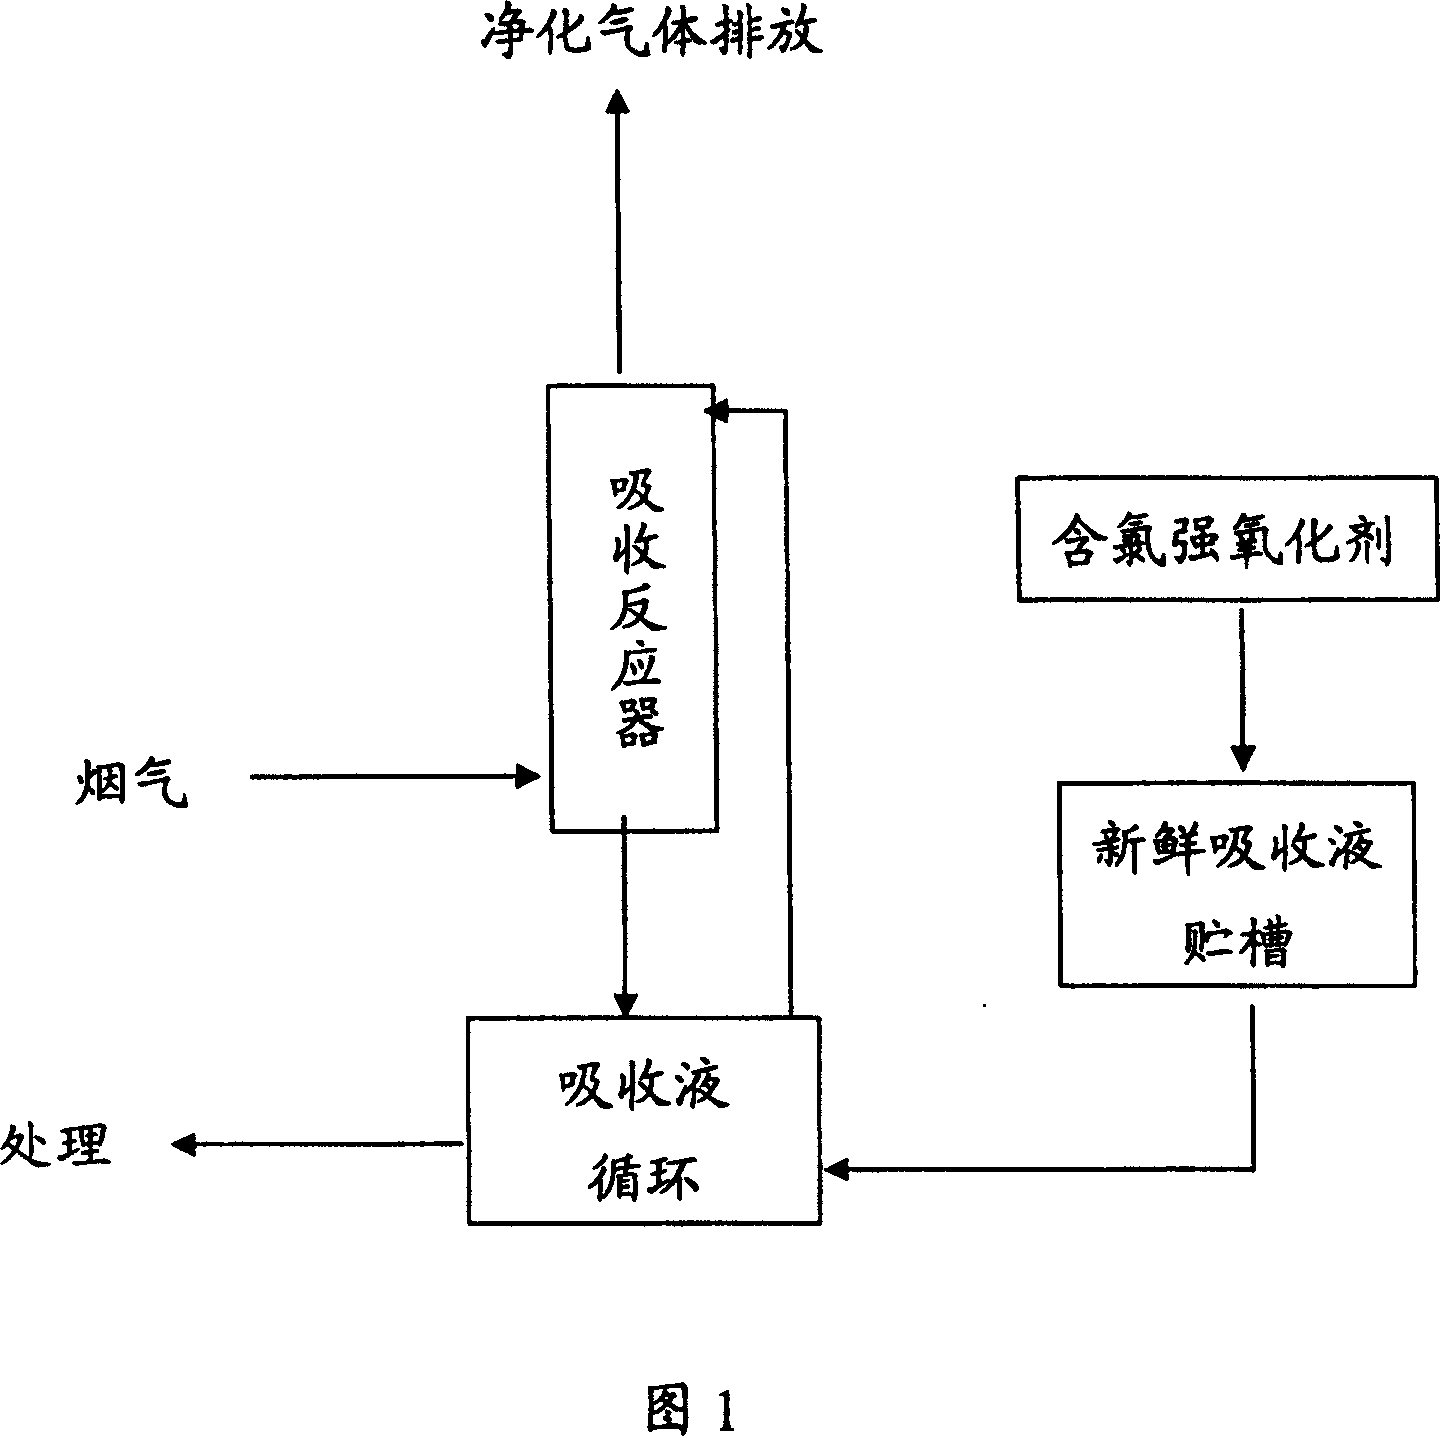 Wet method combined process for desulfurization and denitration for chlorine-containing strong oxidizer absorption liquid